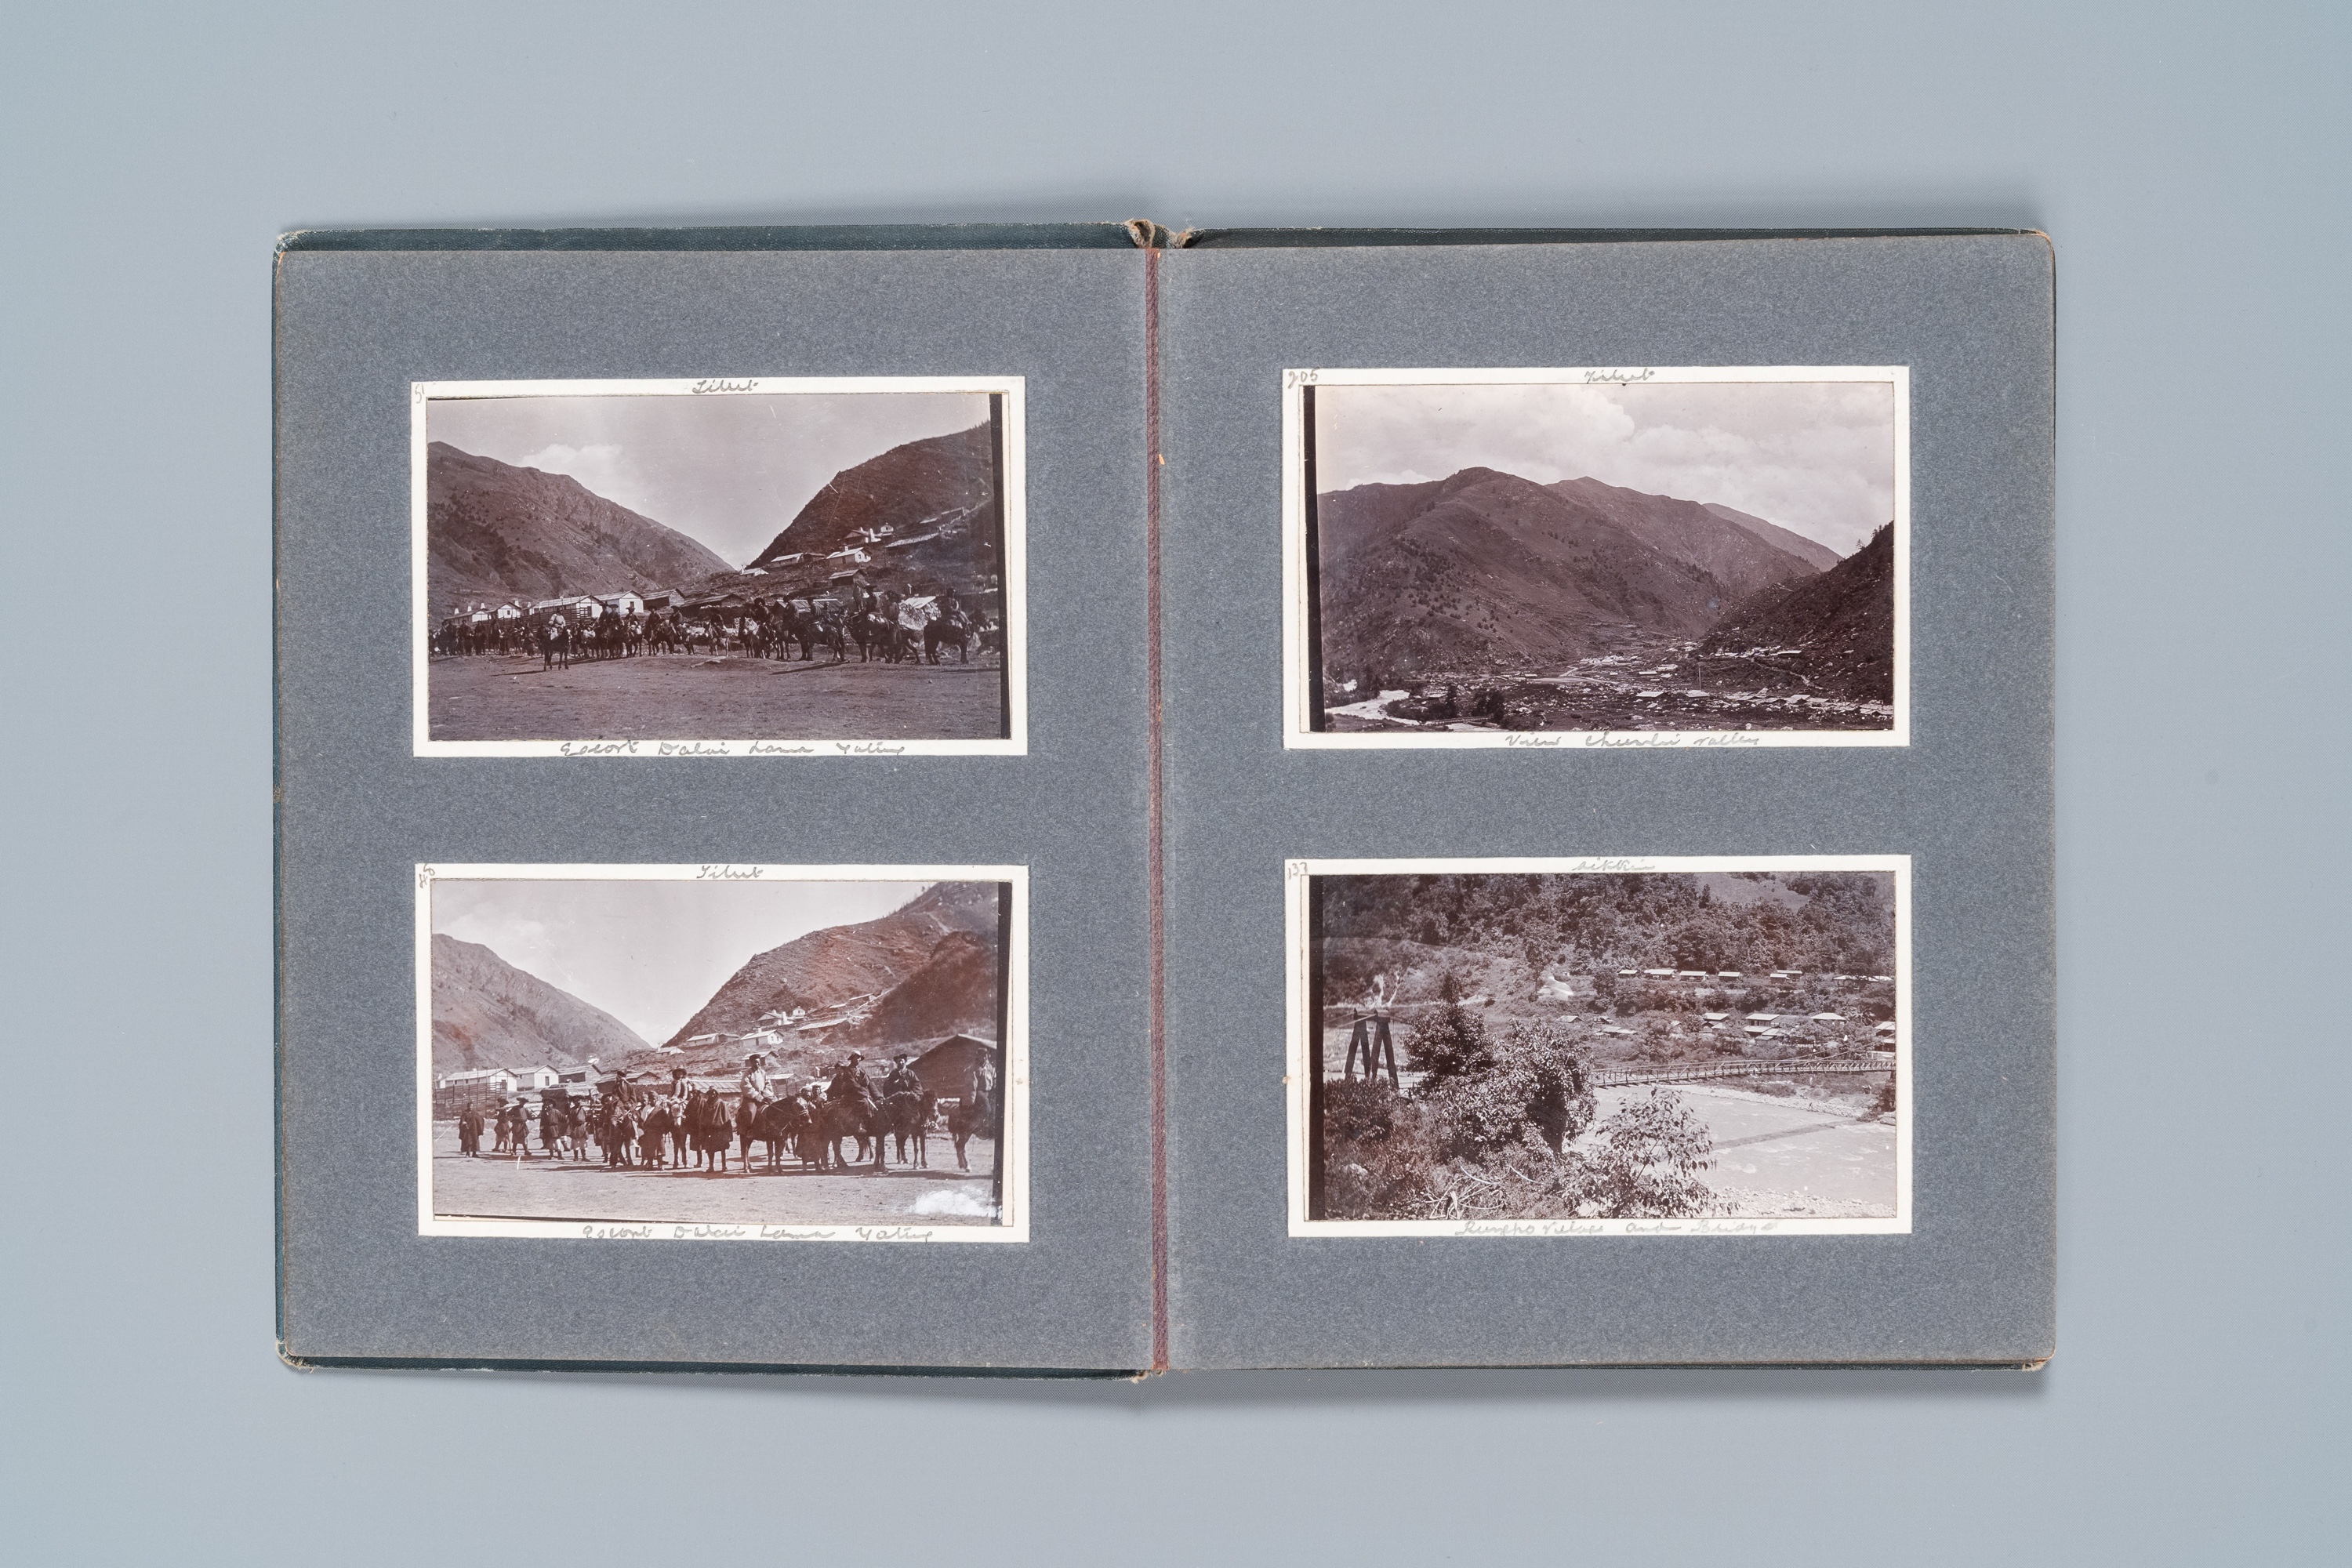 A rare photo album on the 13th Dalai Lama's return from exile from India, ca. 1912/1913 - Image 7 of 21